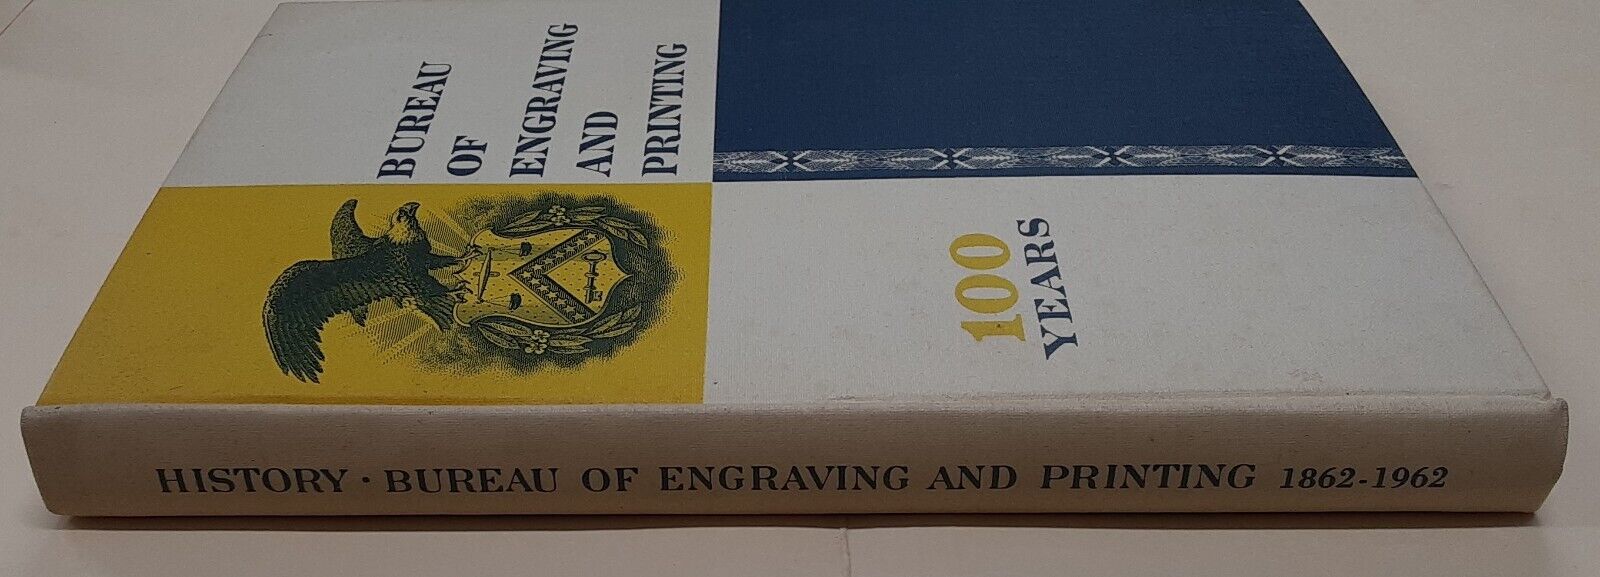 1962 100 Years of the Bureau of Engraving & Printing Book Pre-owned